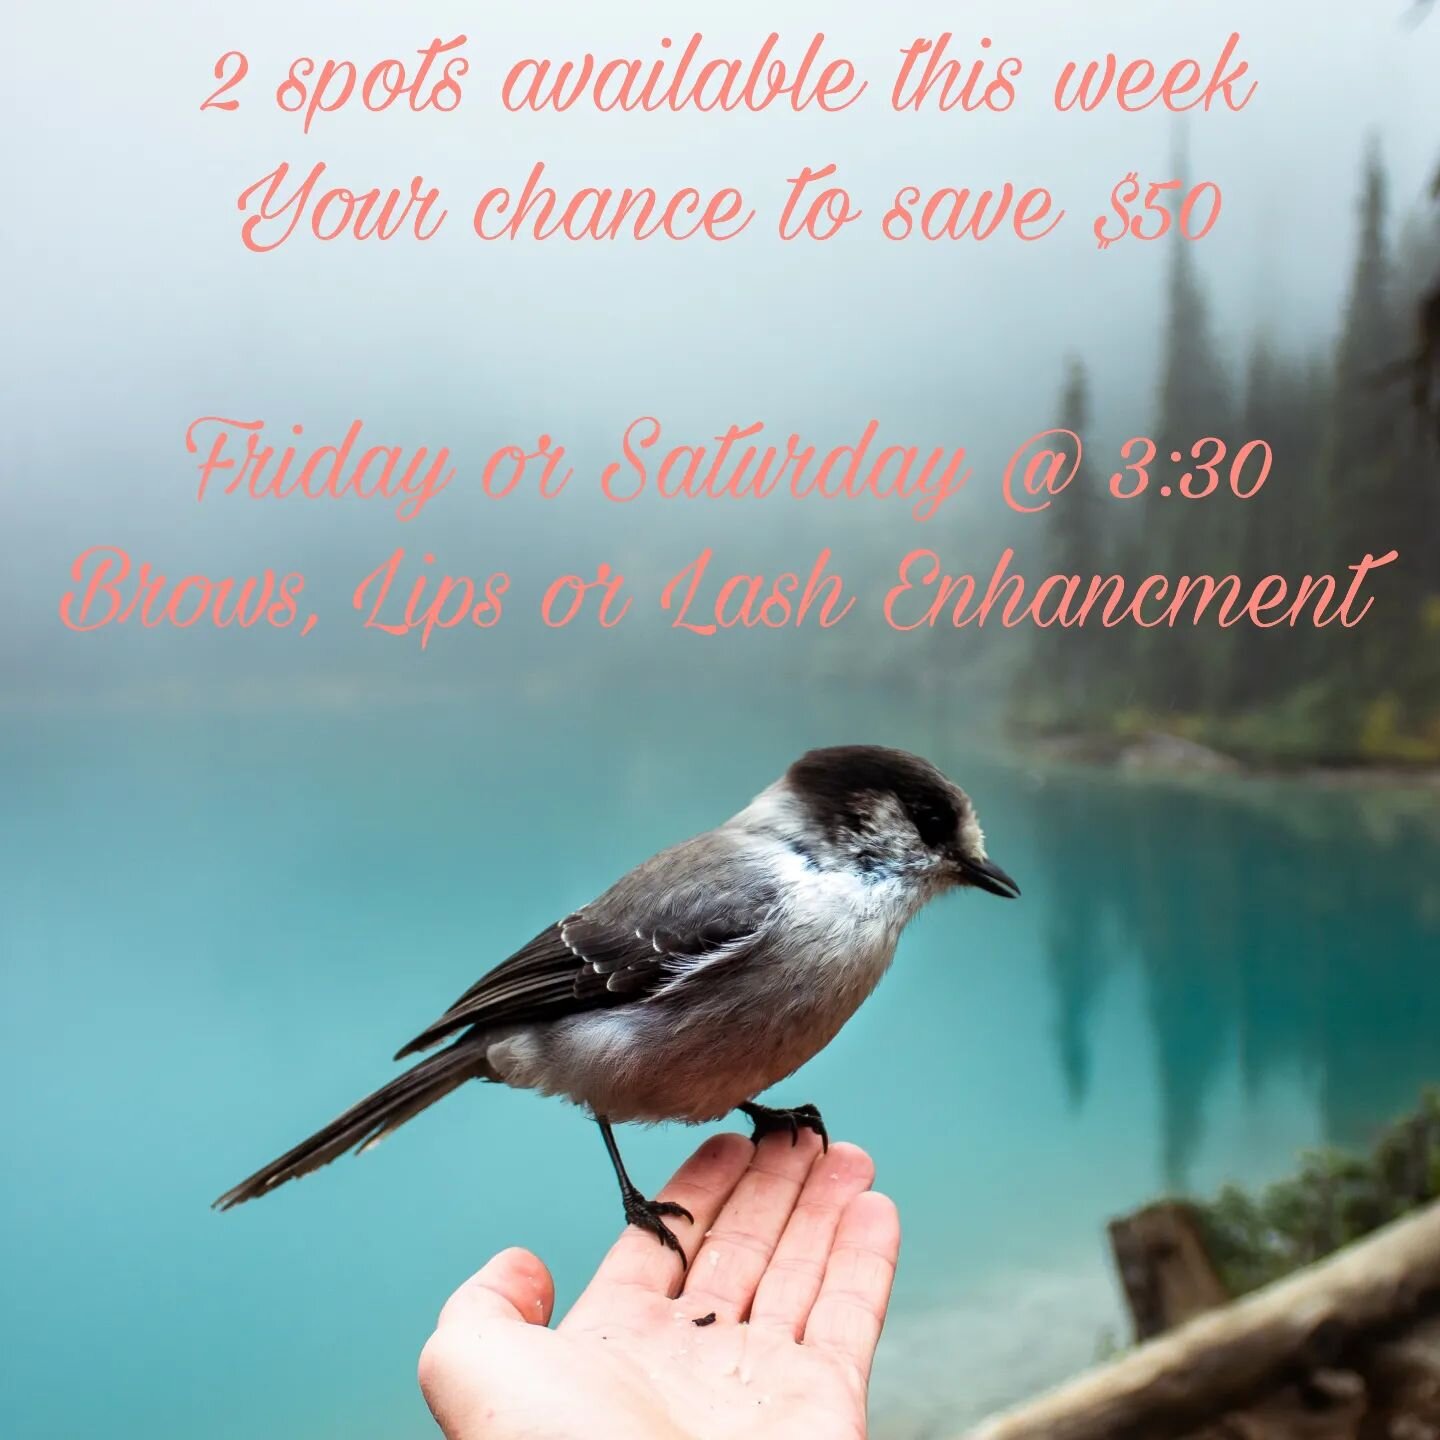 A bird in the hand means its you're lucky day to save $50 on a brow, lip or lash enhancement appointment. 🐦
I have 2 appointments available this week on Friday &amp; Saturday both at 3:30. Take this as a sign and grab this opportunity!

Book via the